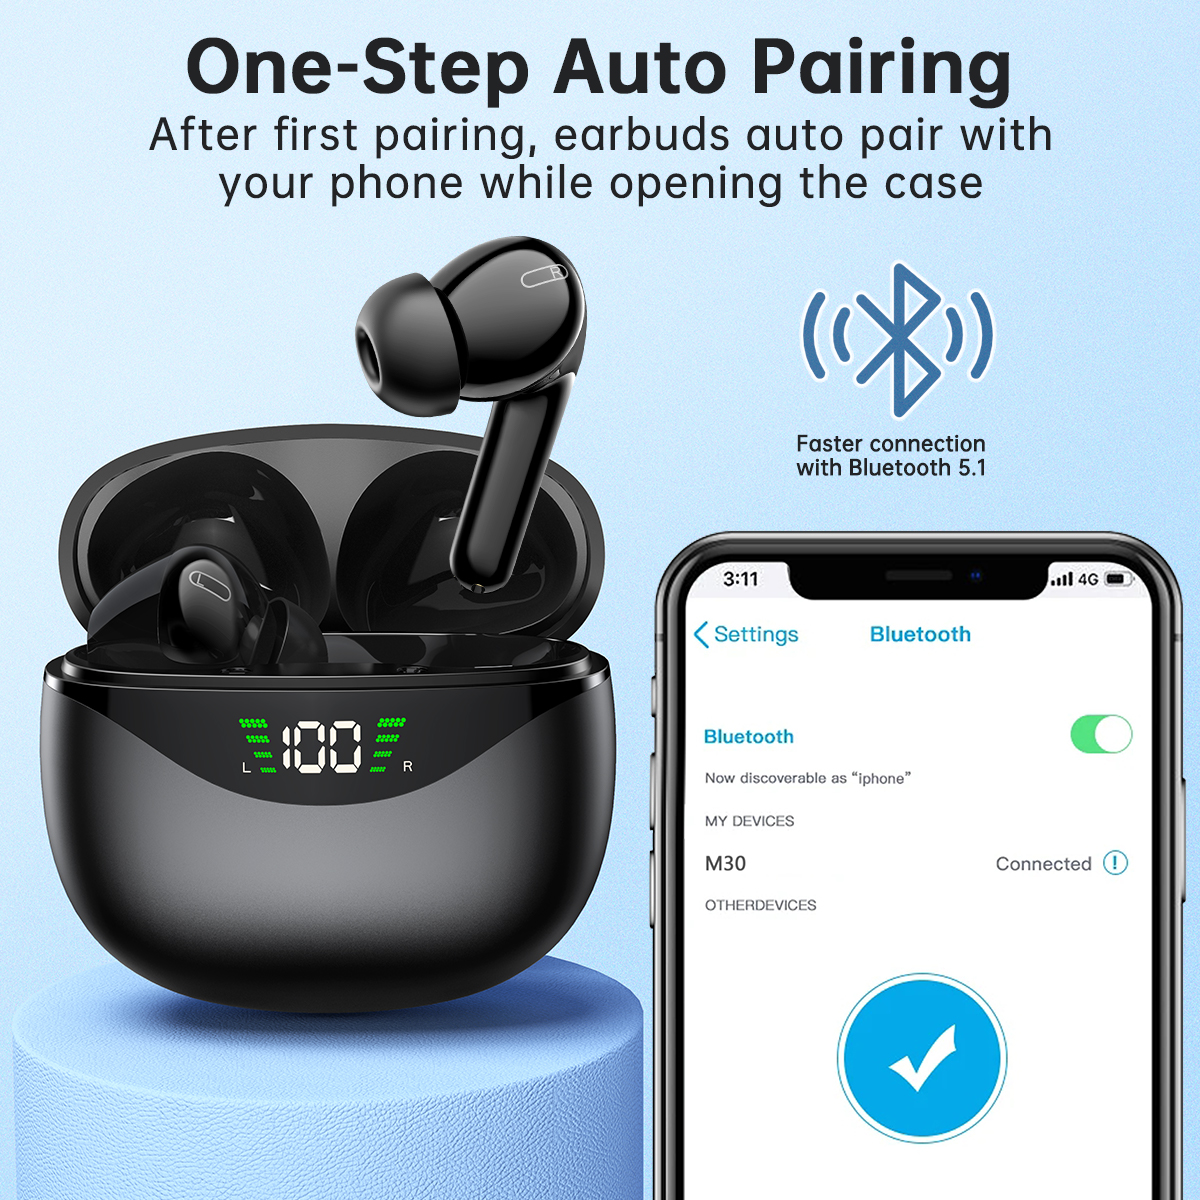 Wireless Earbuds, Bluetooth 5.1 Headphones 30Hrs Playtime with LED Power Display, IPX7 Waterproof Earphones, One-Step Pairing, TWS in Ear Stereo Headset Built-in Mic for iPhone/Android (Black) - image 3 of 7